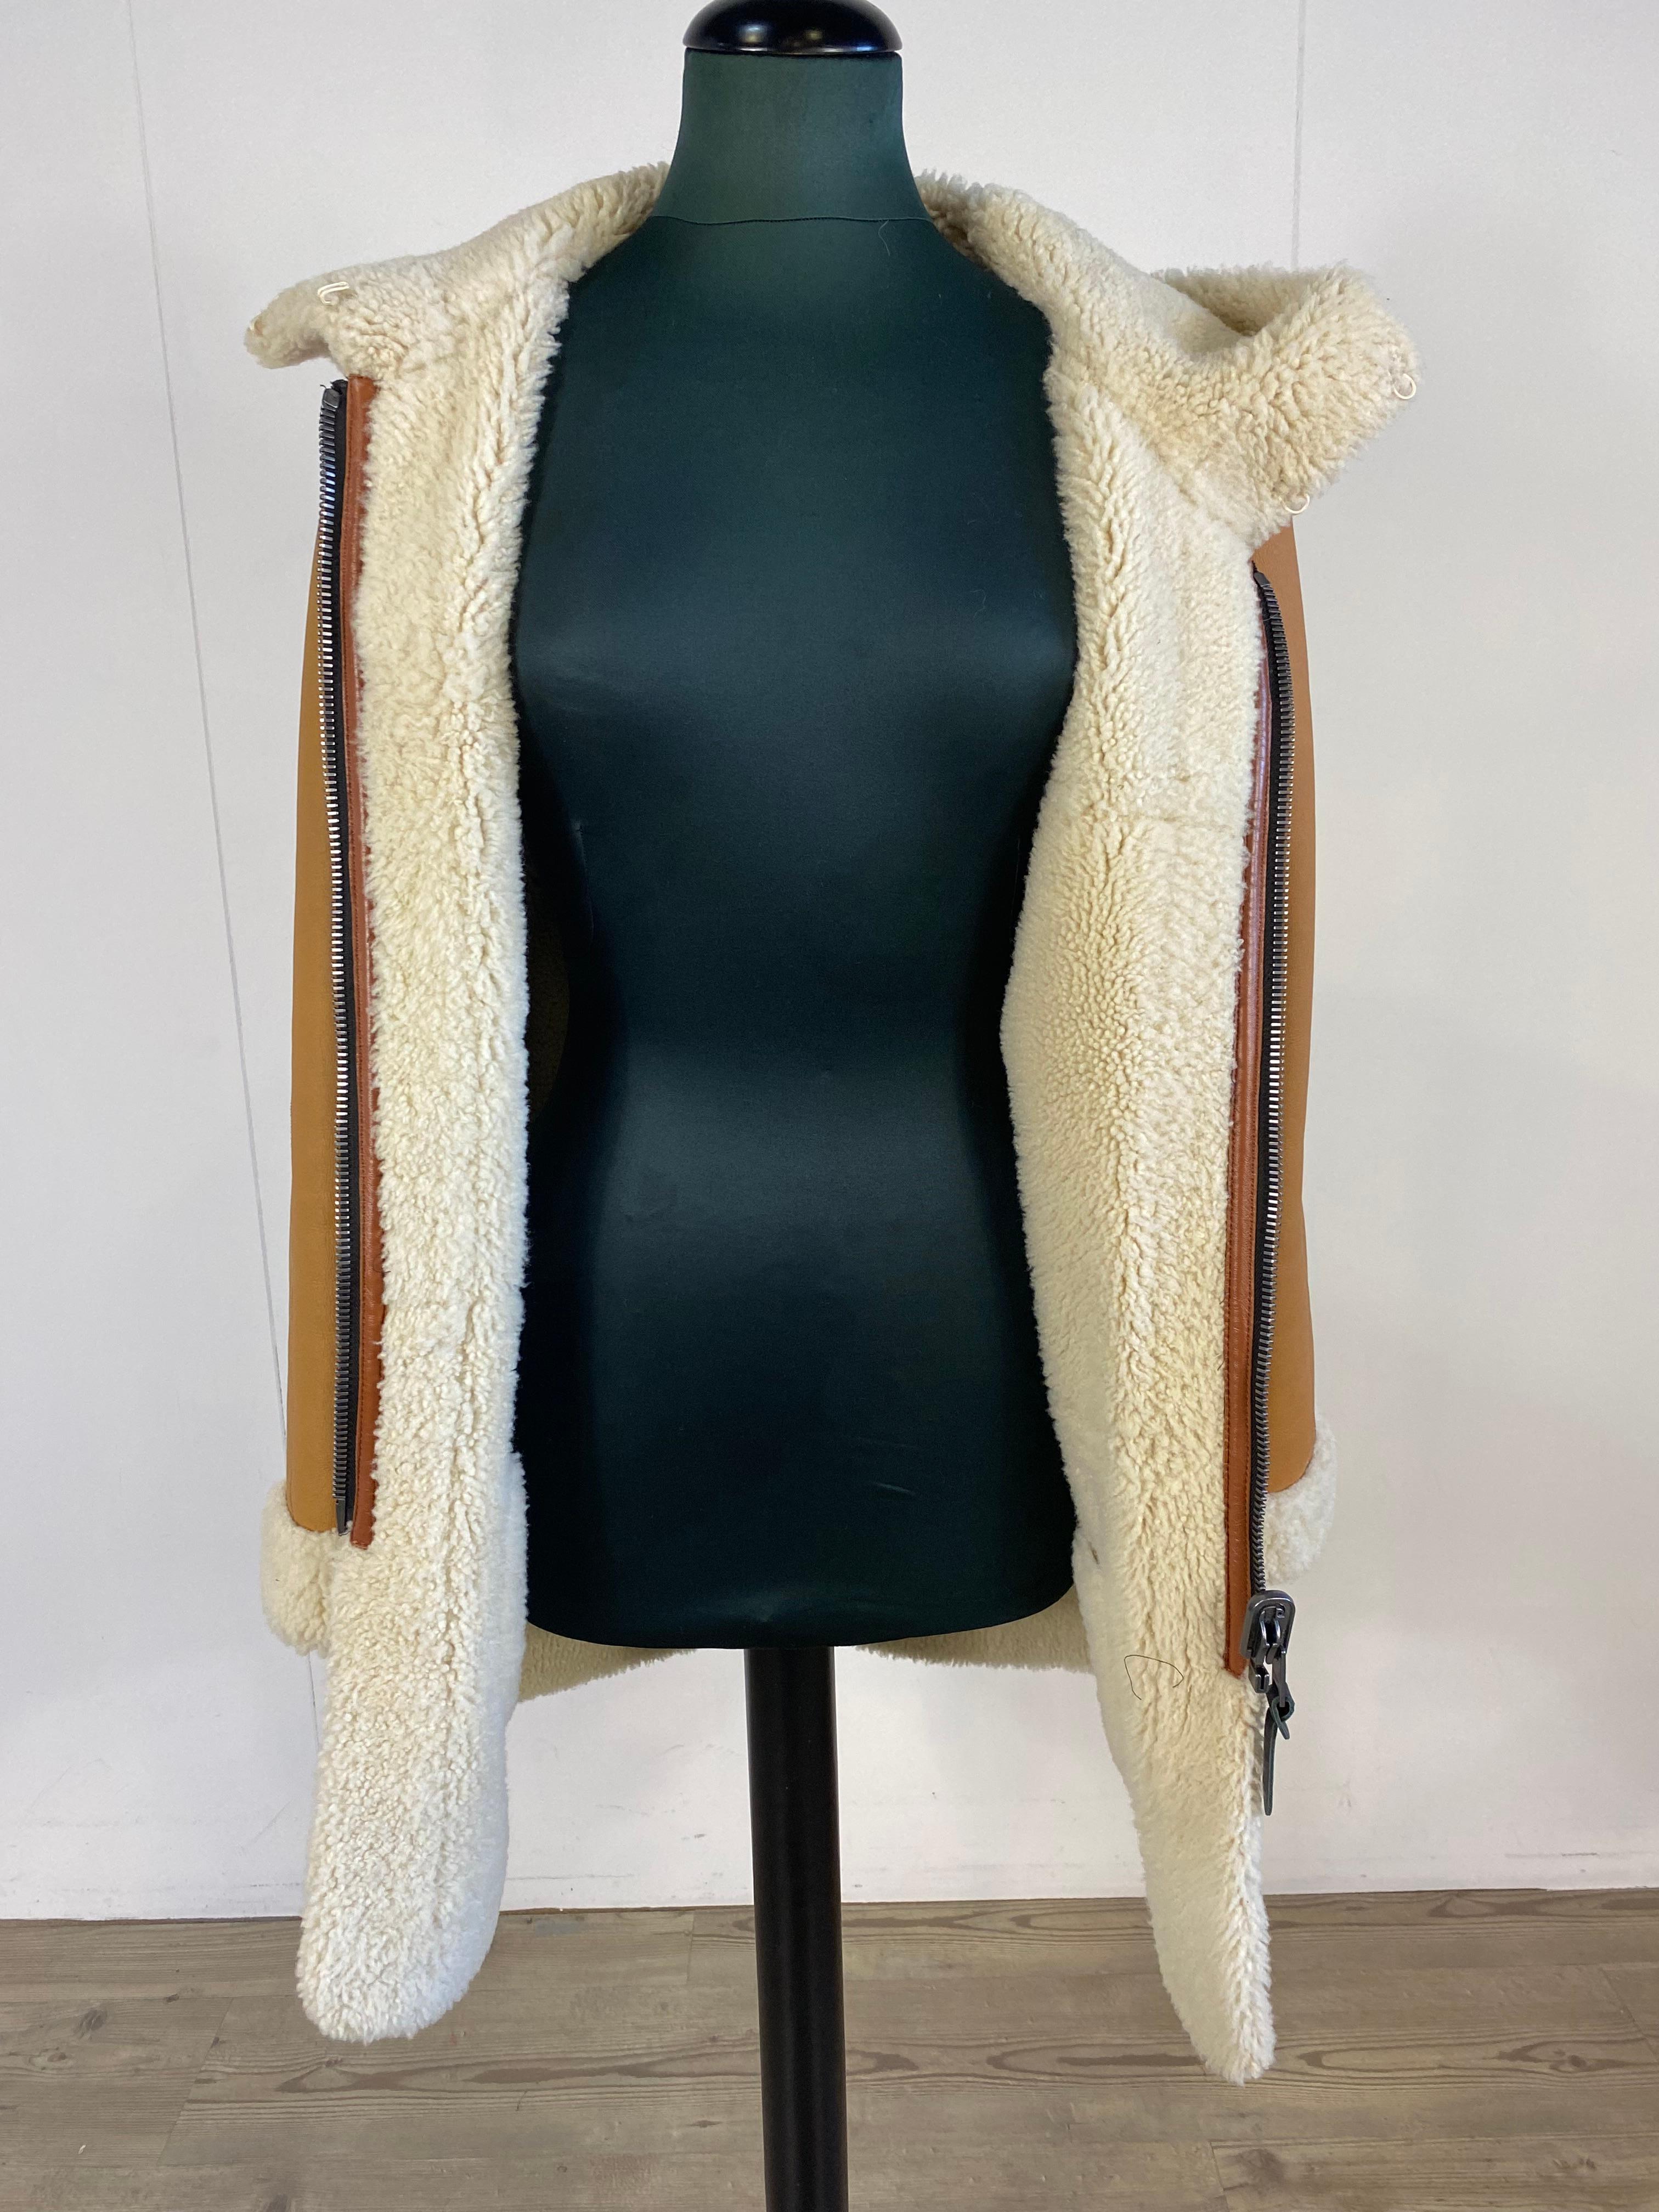 Coach sheepskin in light brown leather, with hood, there are 2 pockets on the front at leg height, new never worn.
Measurements, shoulder 43cm, chest 47cm, sleeve 64cm, length 82cm.